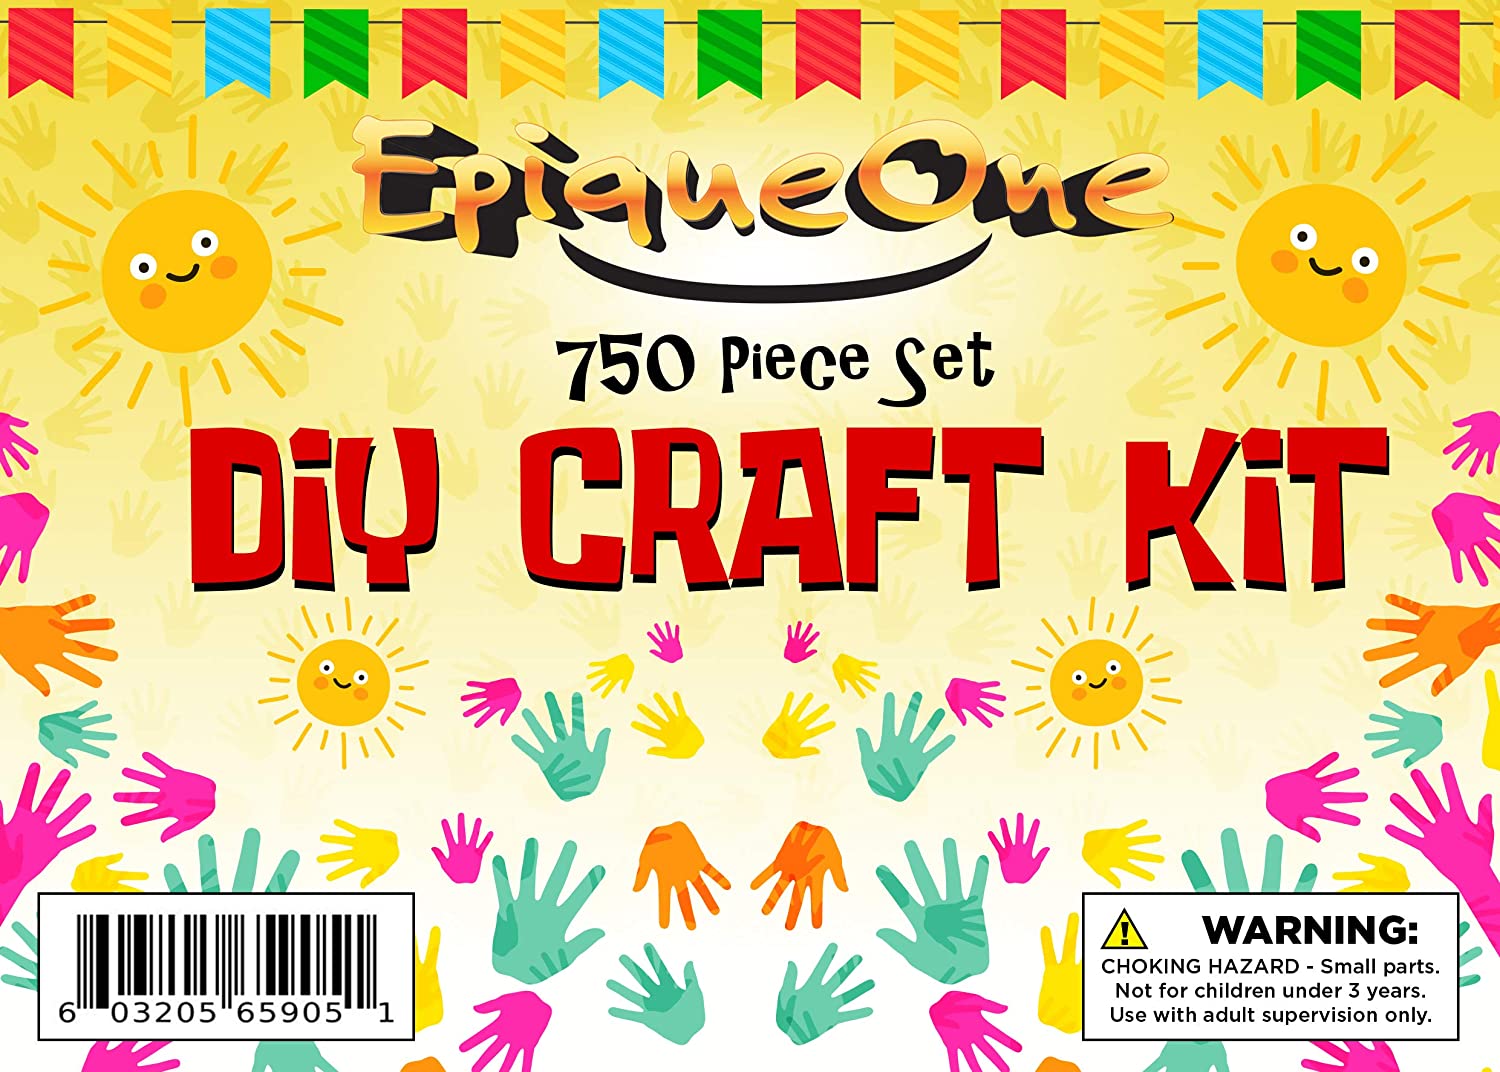 Epiqueone 1500-Piece Craft Set for Kids Arts & Crafts Kit for Use at Home or in School Bulk Supplies for A Wide Variety of Crafting Projects